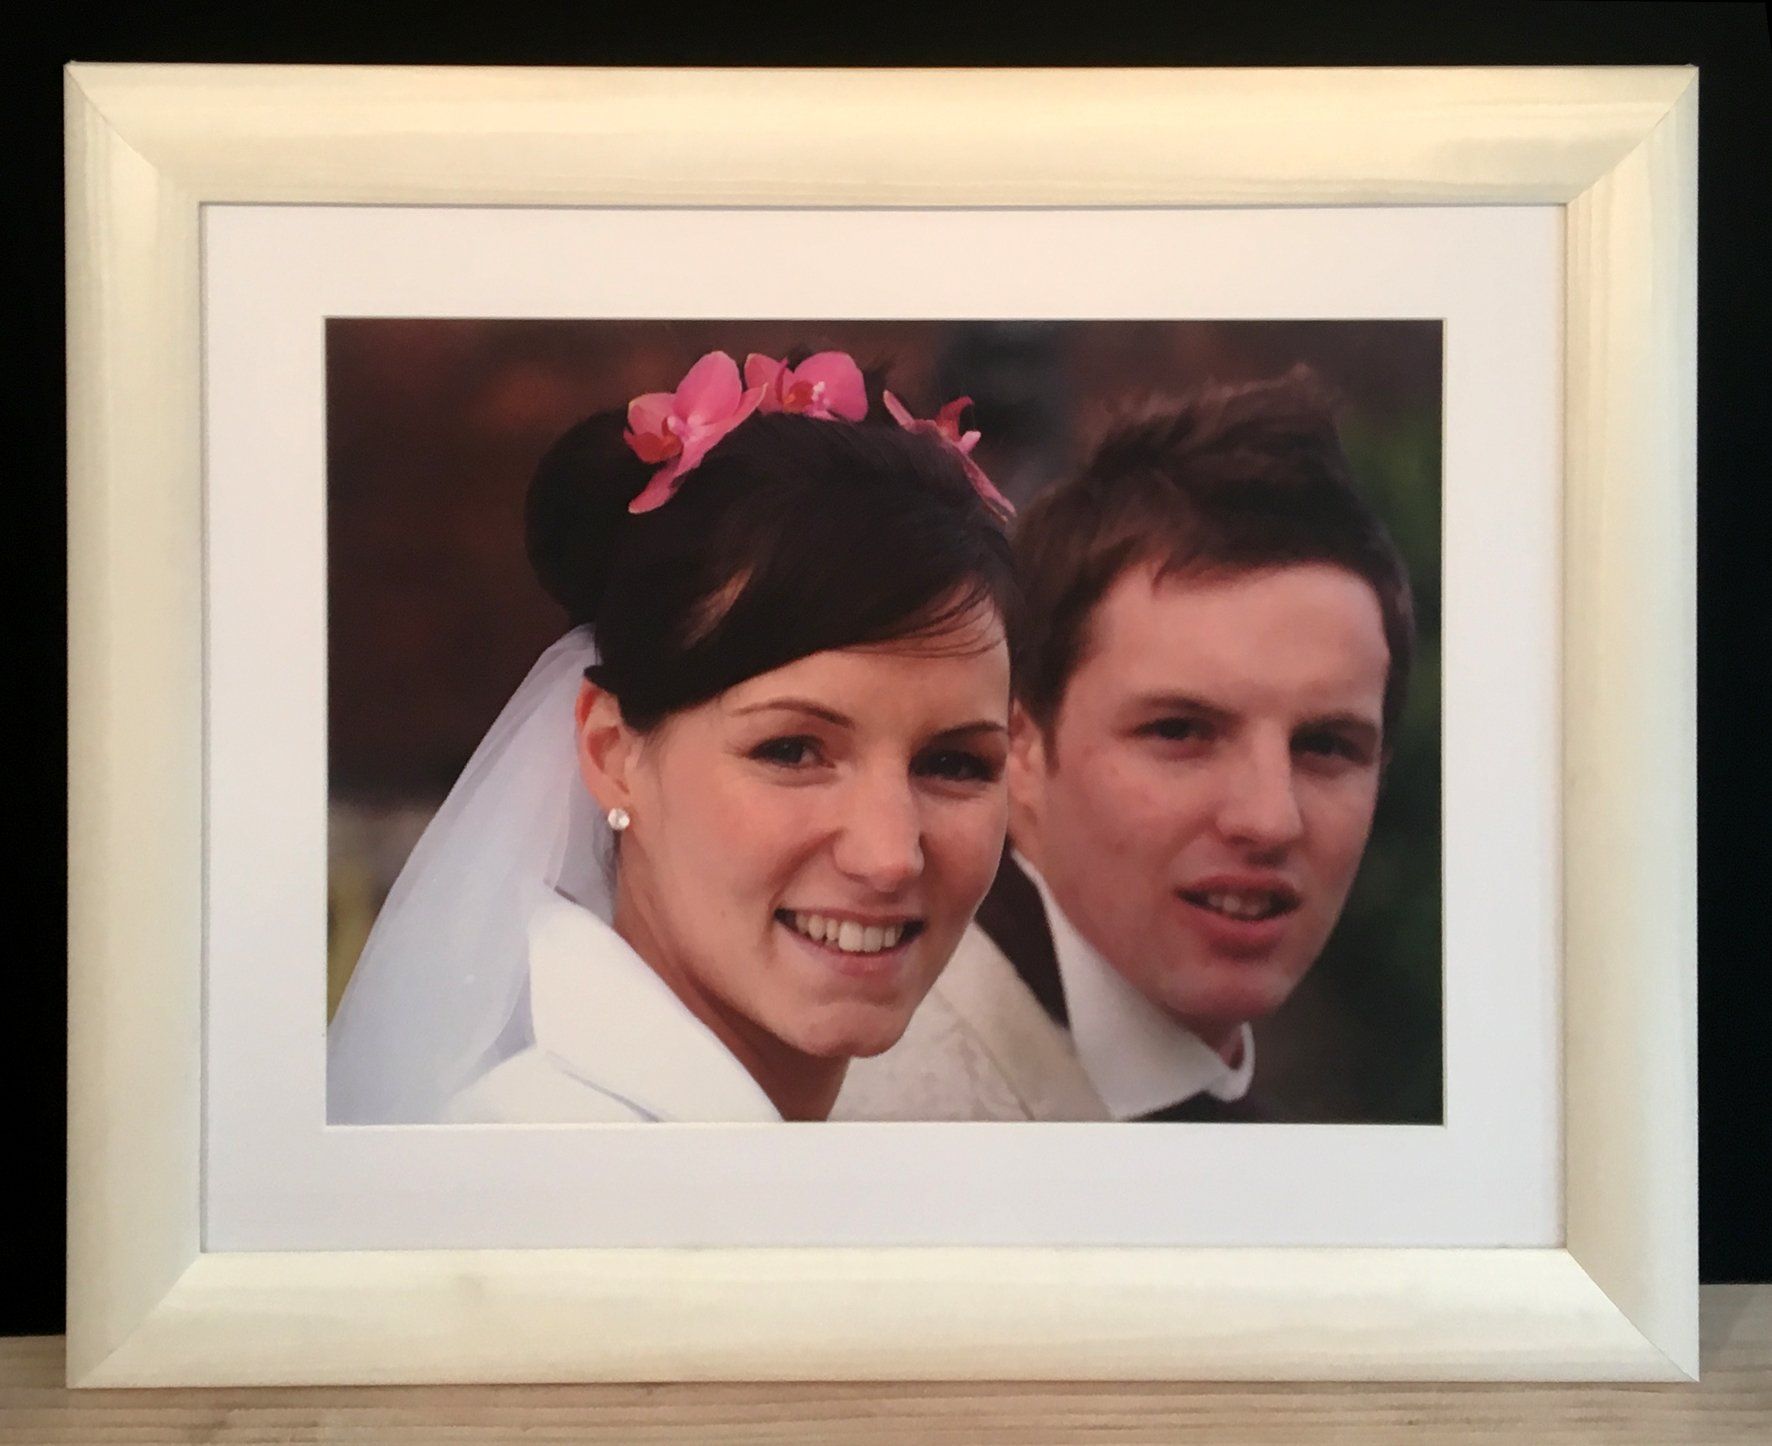 D & B wedding day in white fabric frame